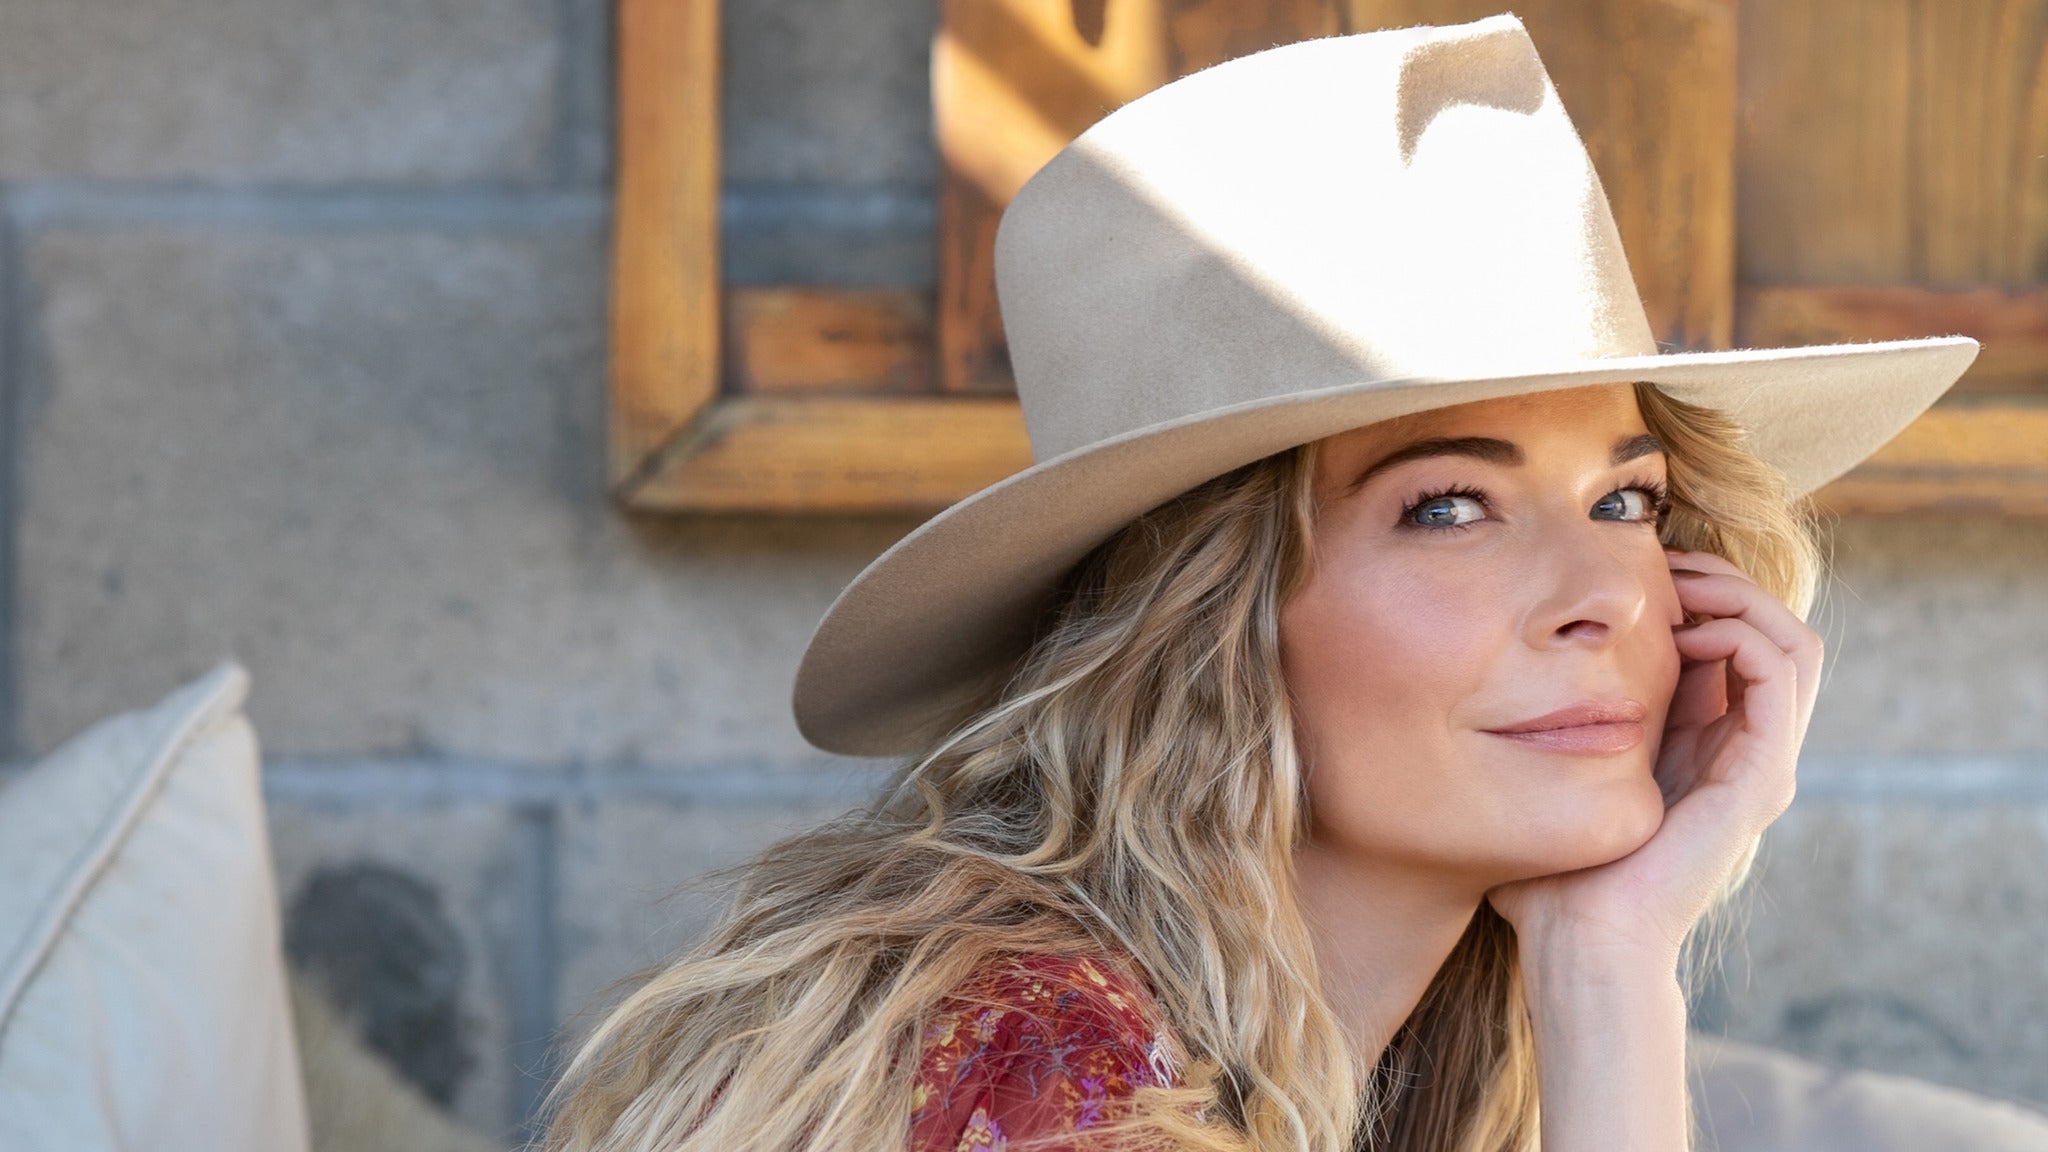 Image used with permission from Ticketmaster | LeAnn Rimes tickets